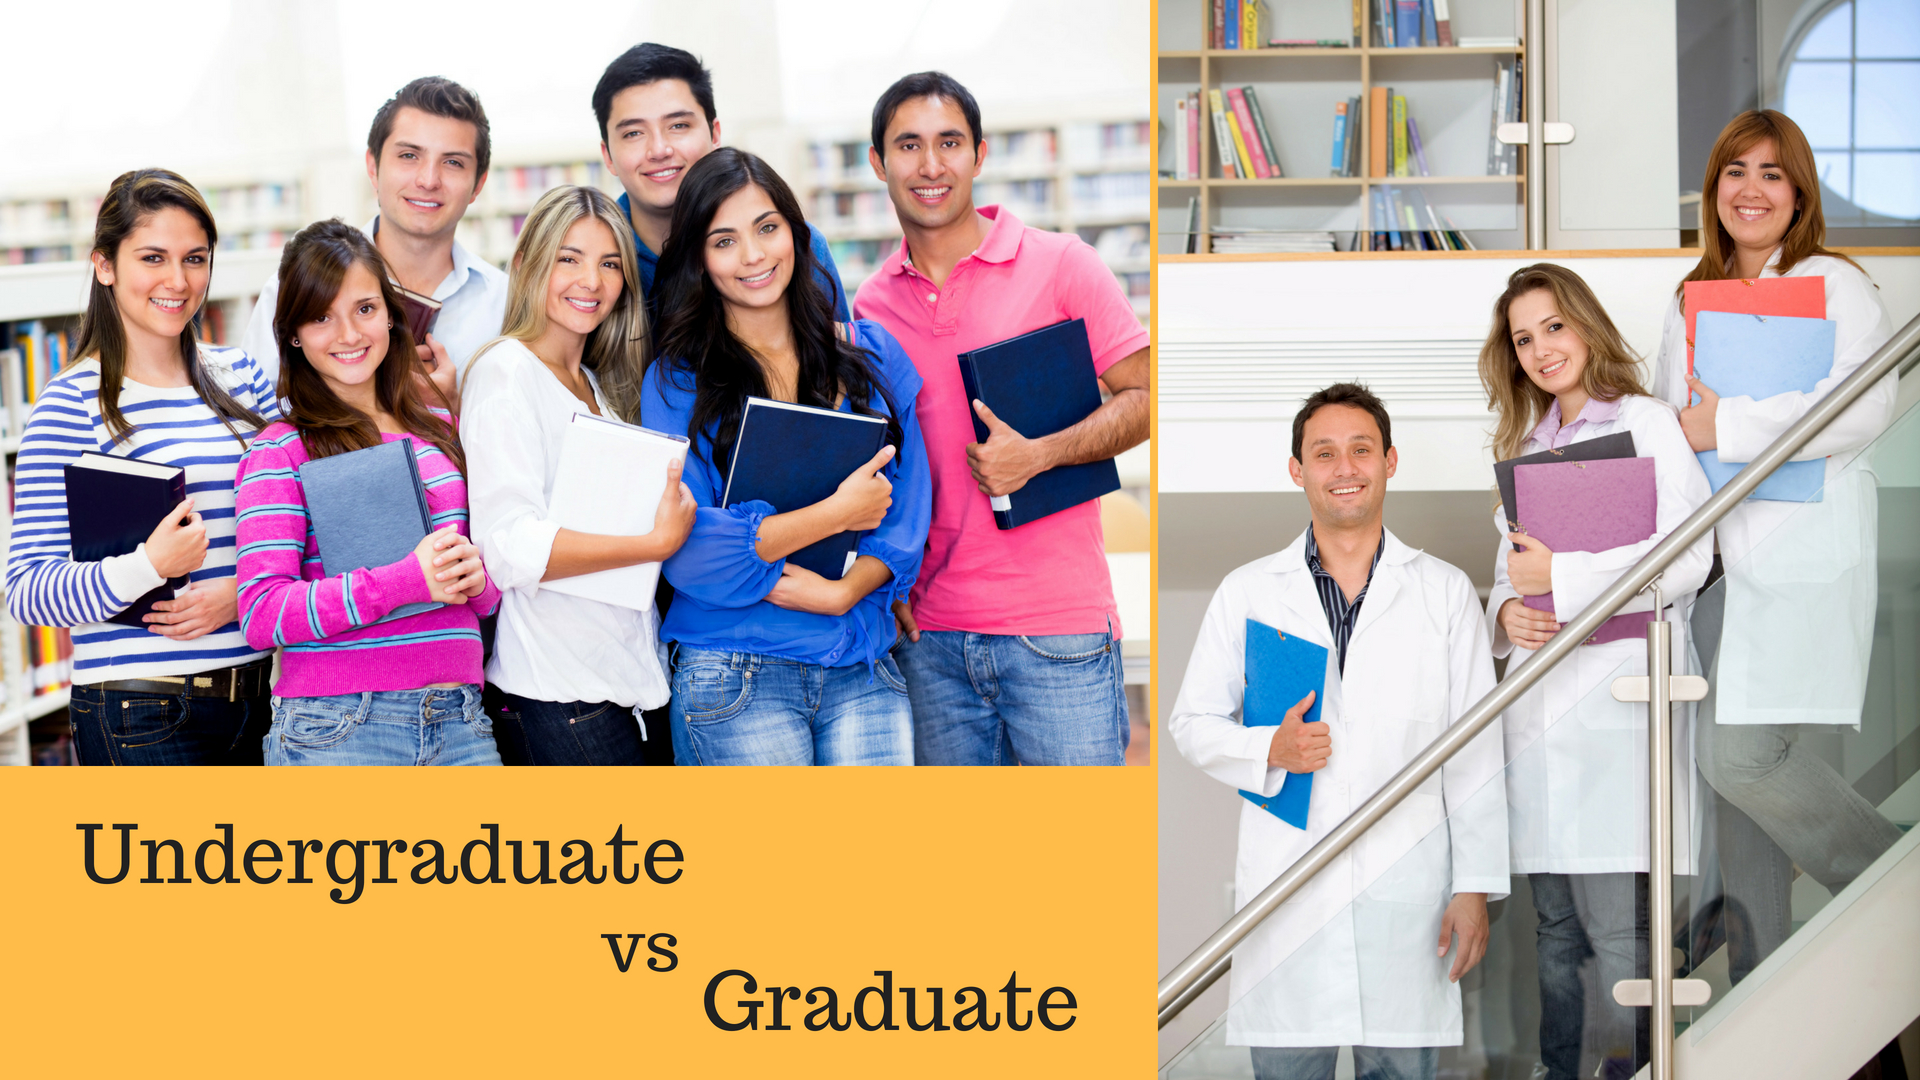 What’s The Difference Between Undergraduate and Graduate?